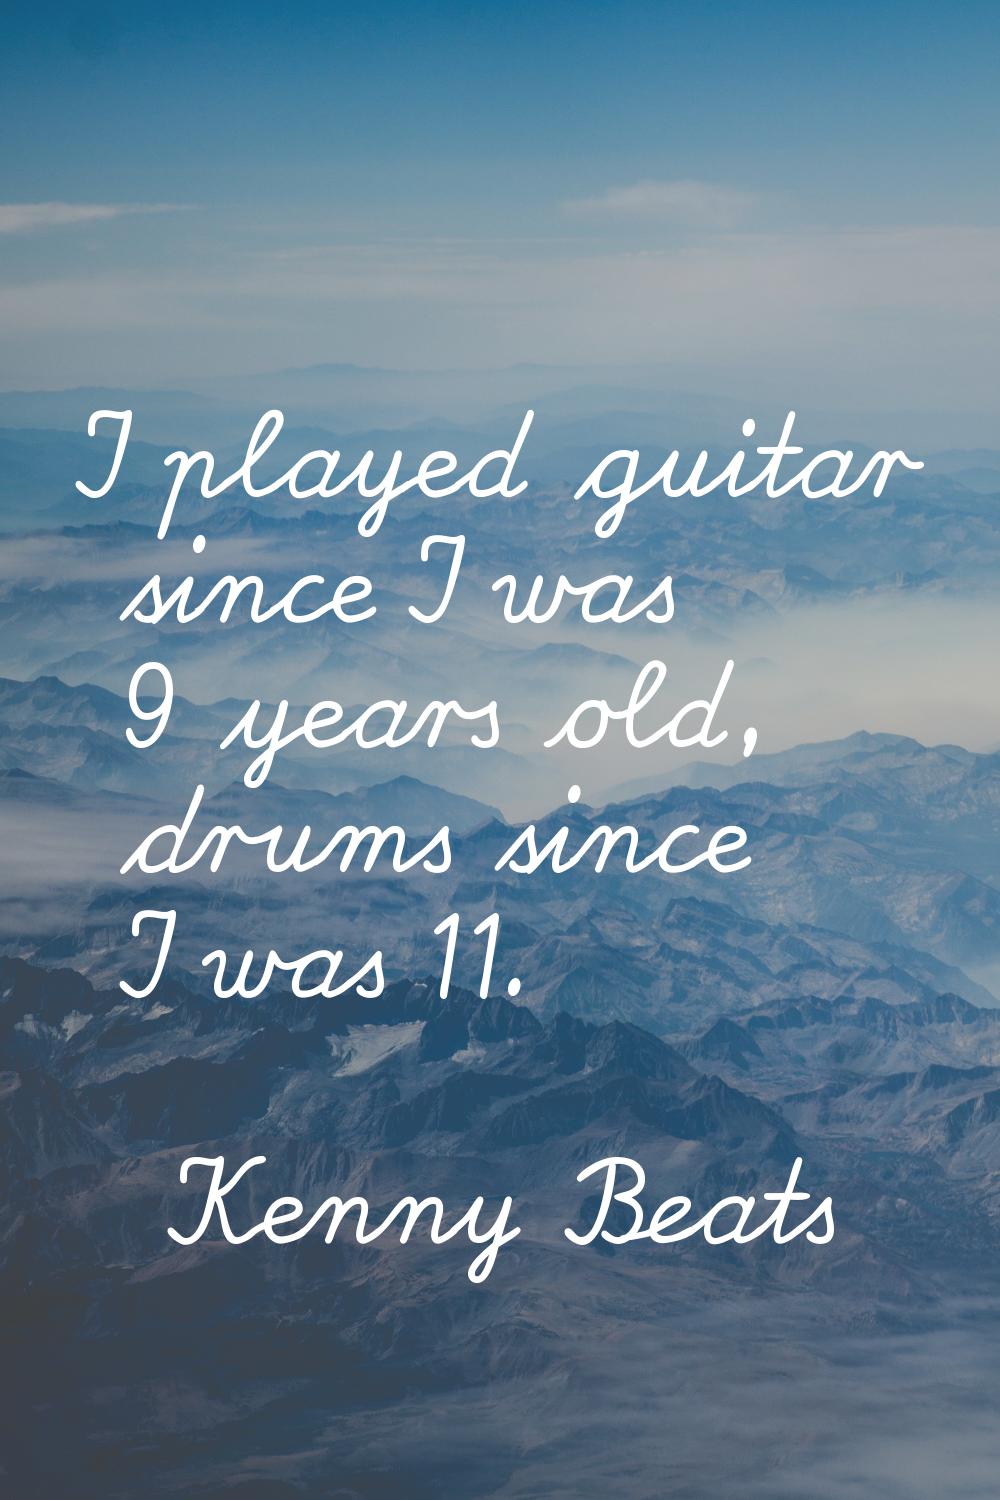 I played guitar since I was 9 years old, drums since I was 11.